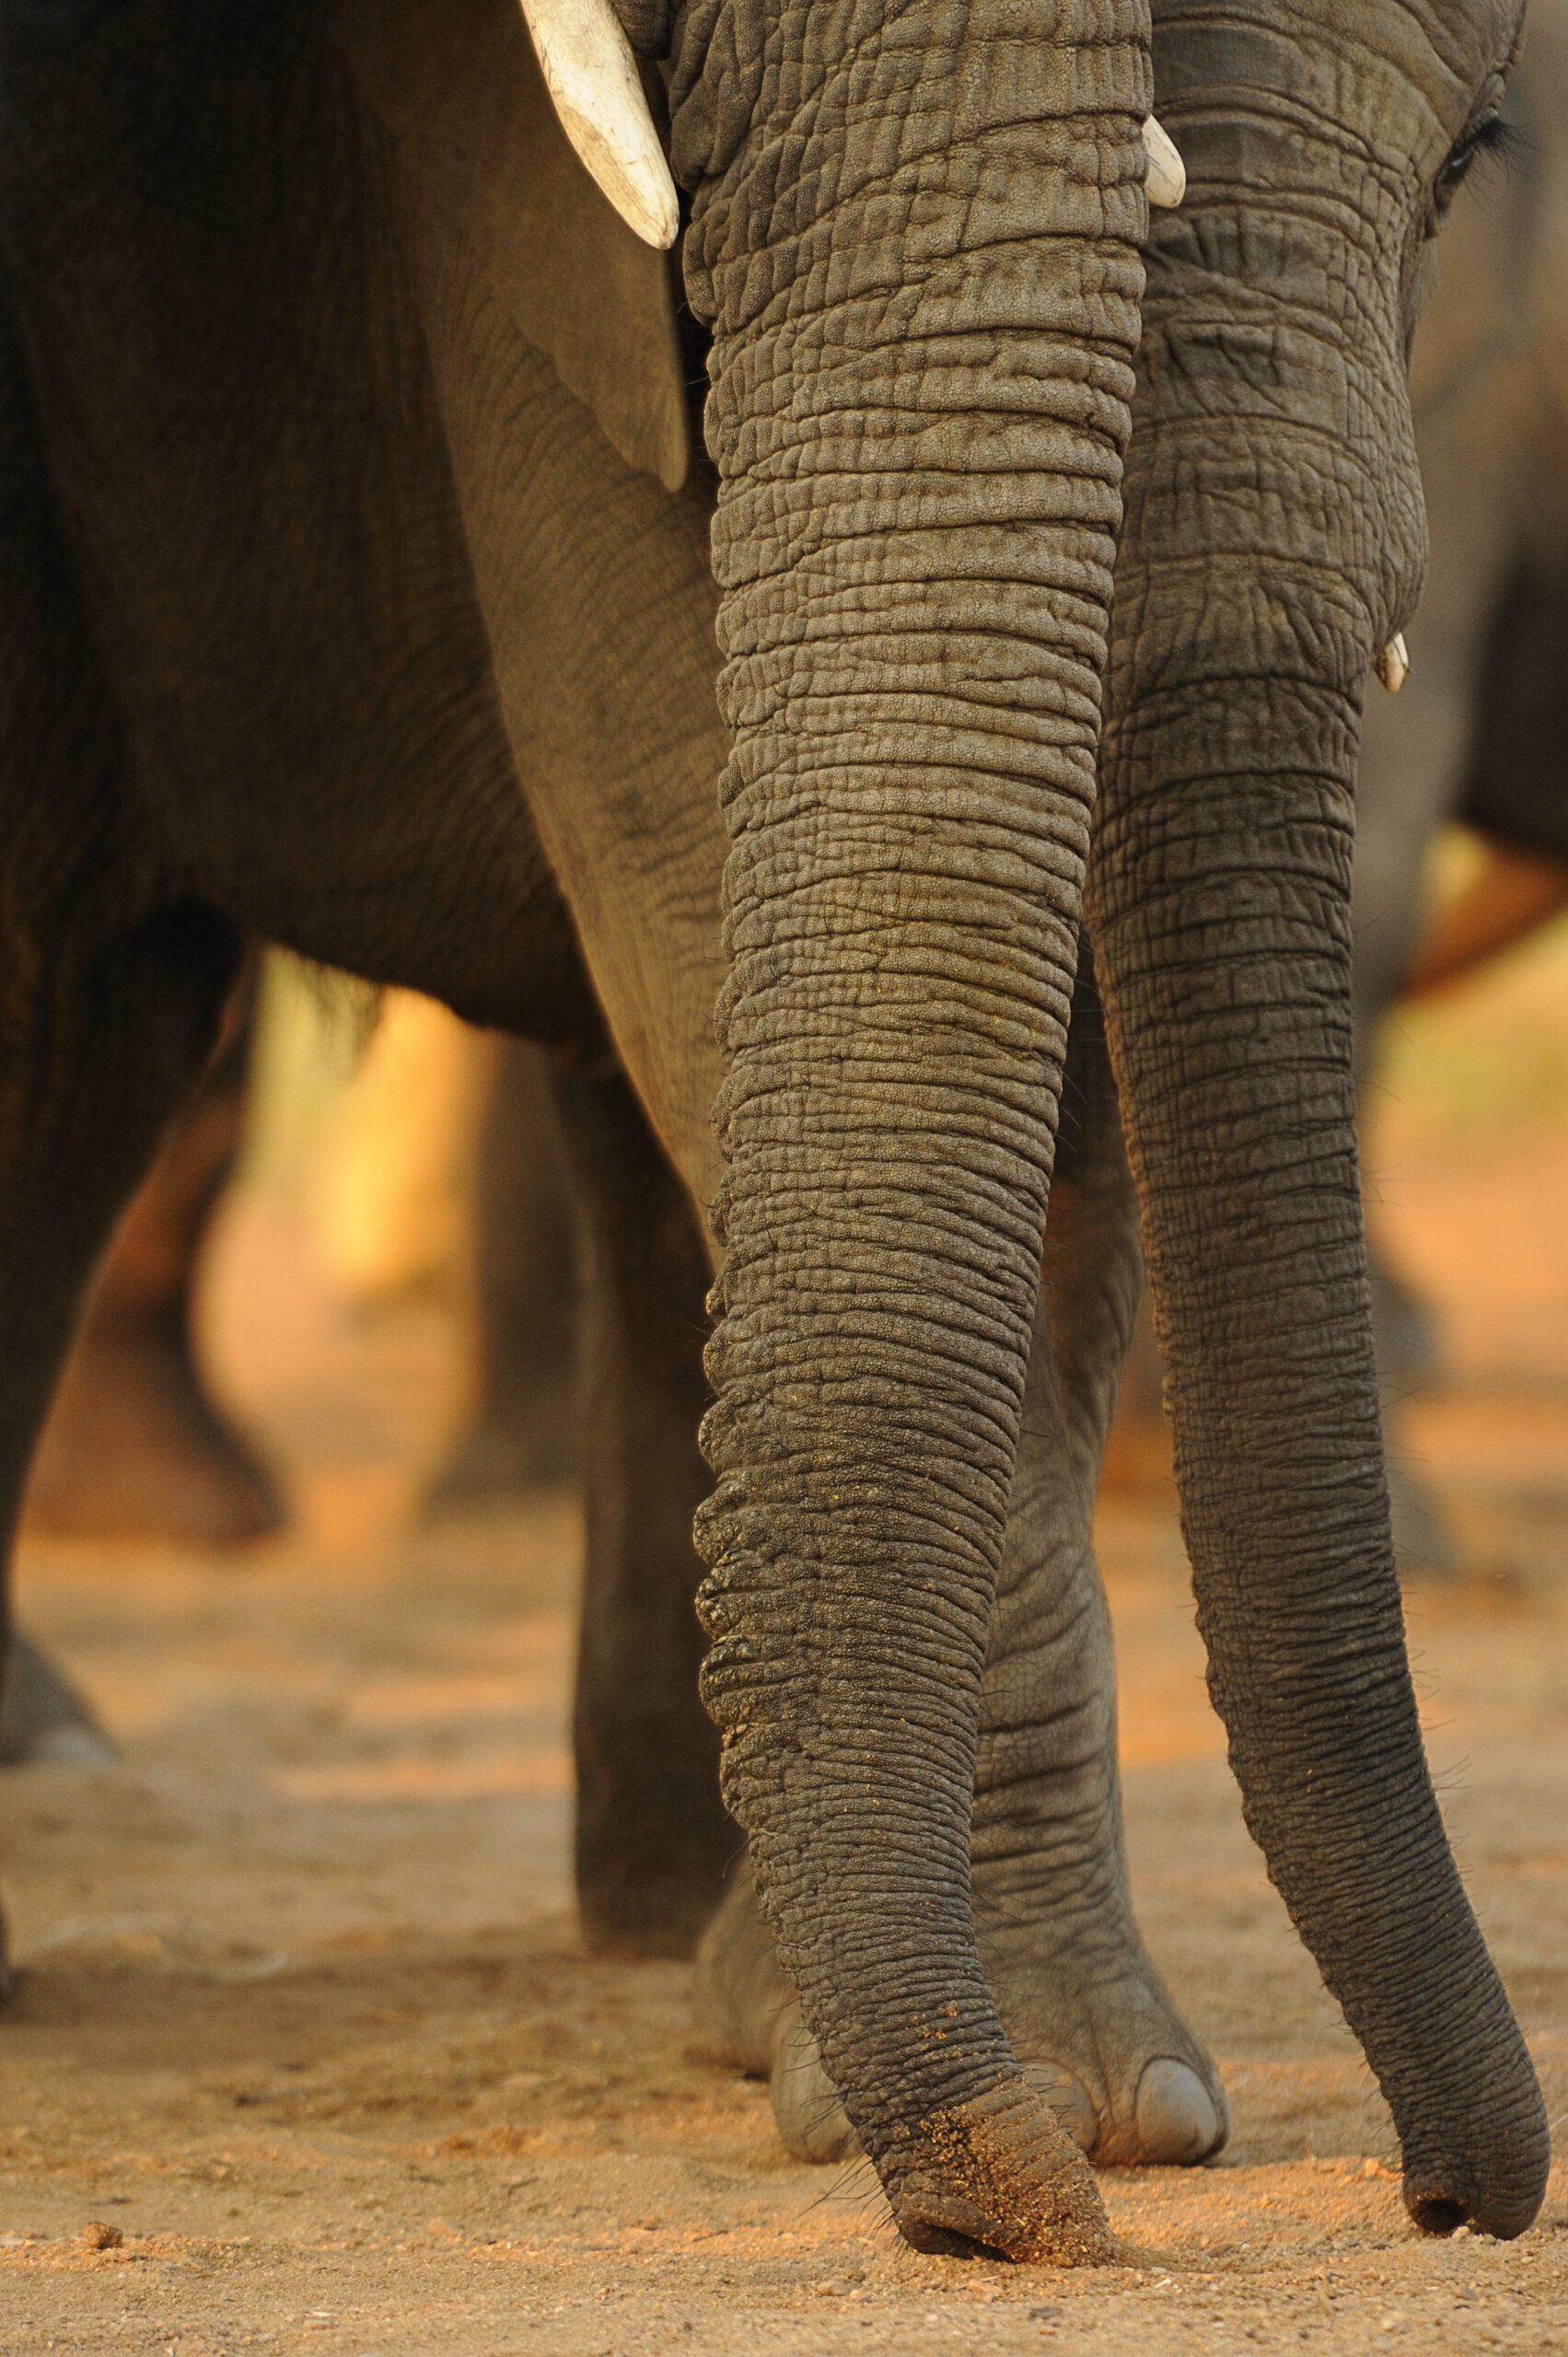 Are There Really 150,000 Muscles in an Elephant's Trunk?